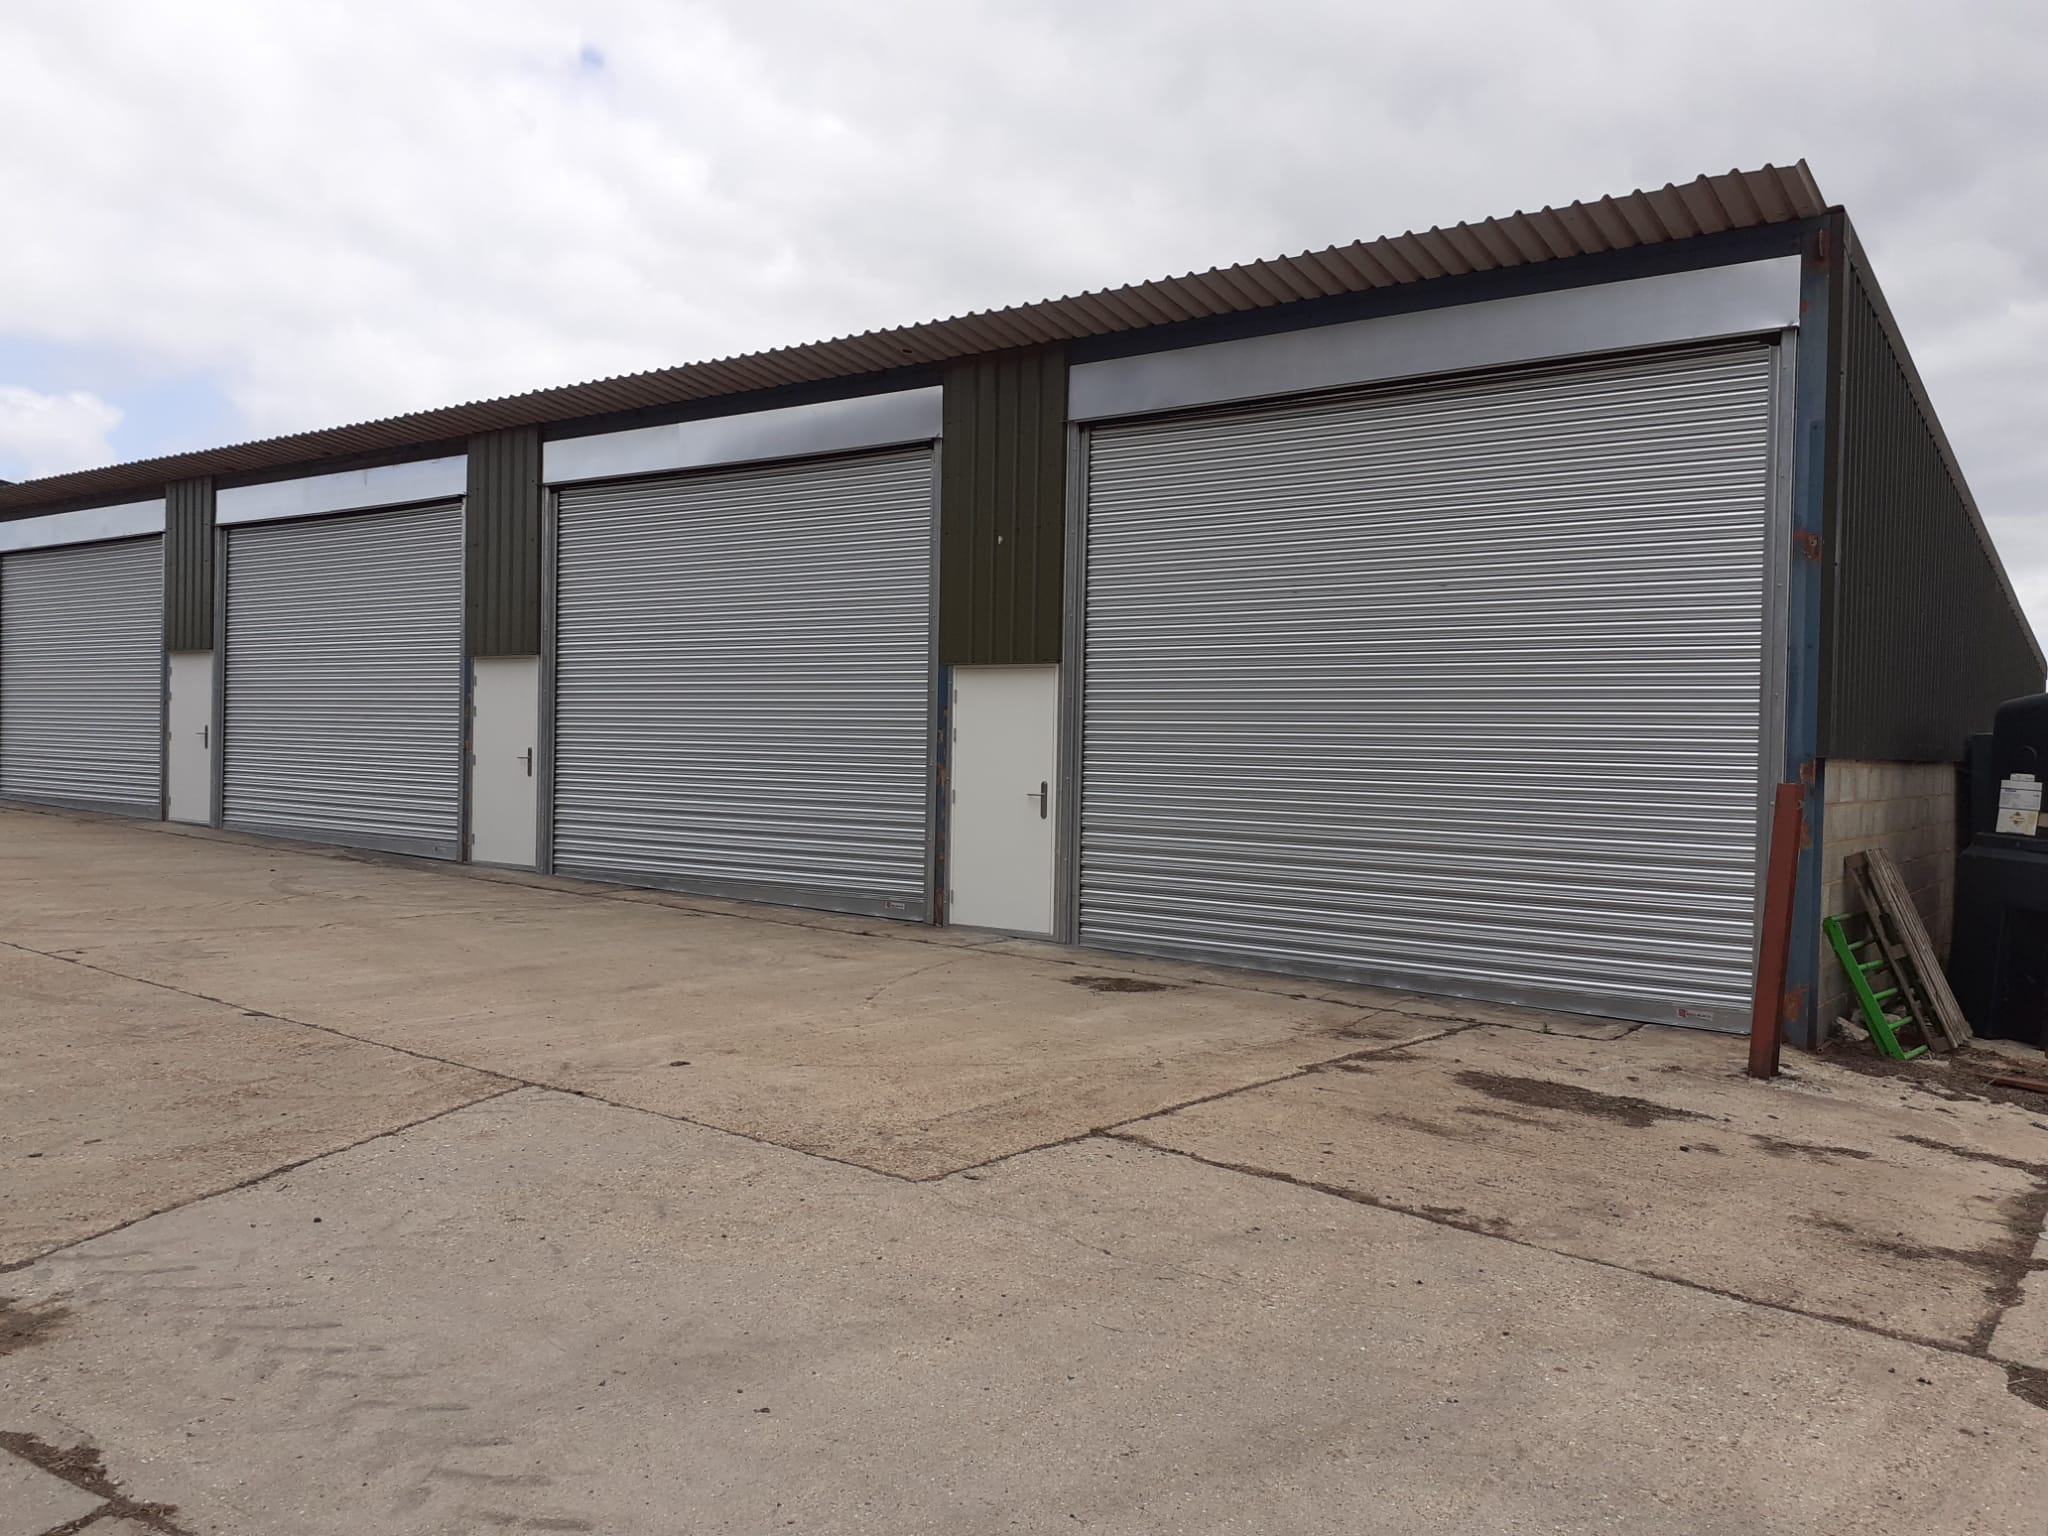 Warehouses to Let near Braintree, Essex